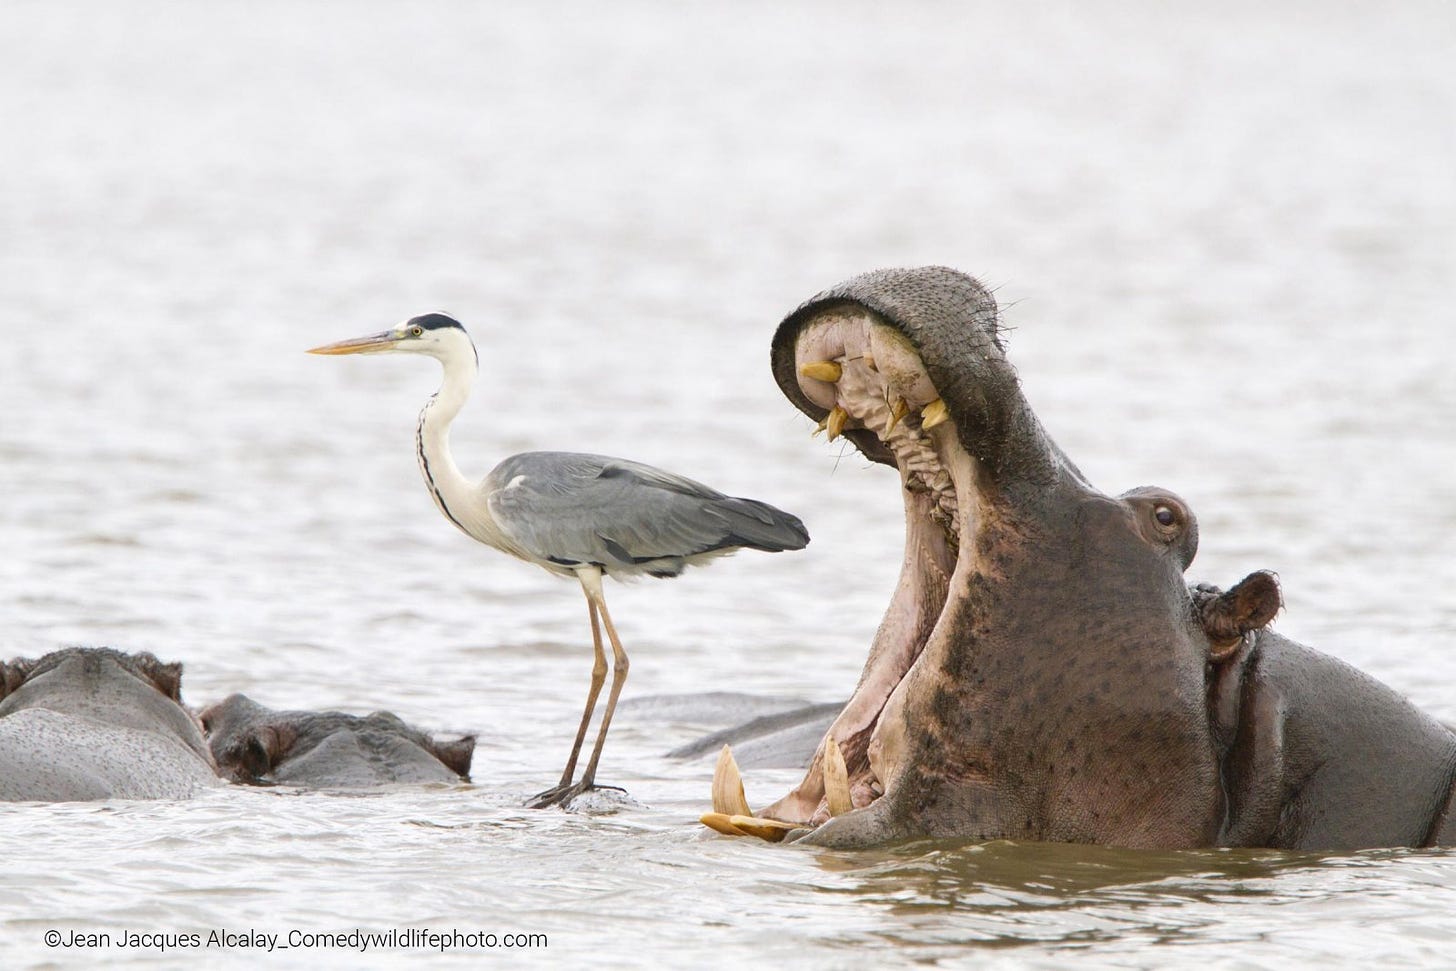 “Hippo yawning next to a heron standing on the back of another hippo”